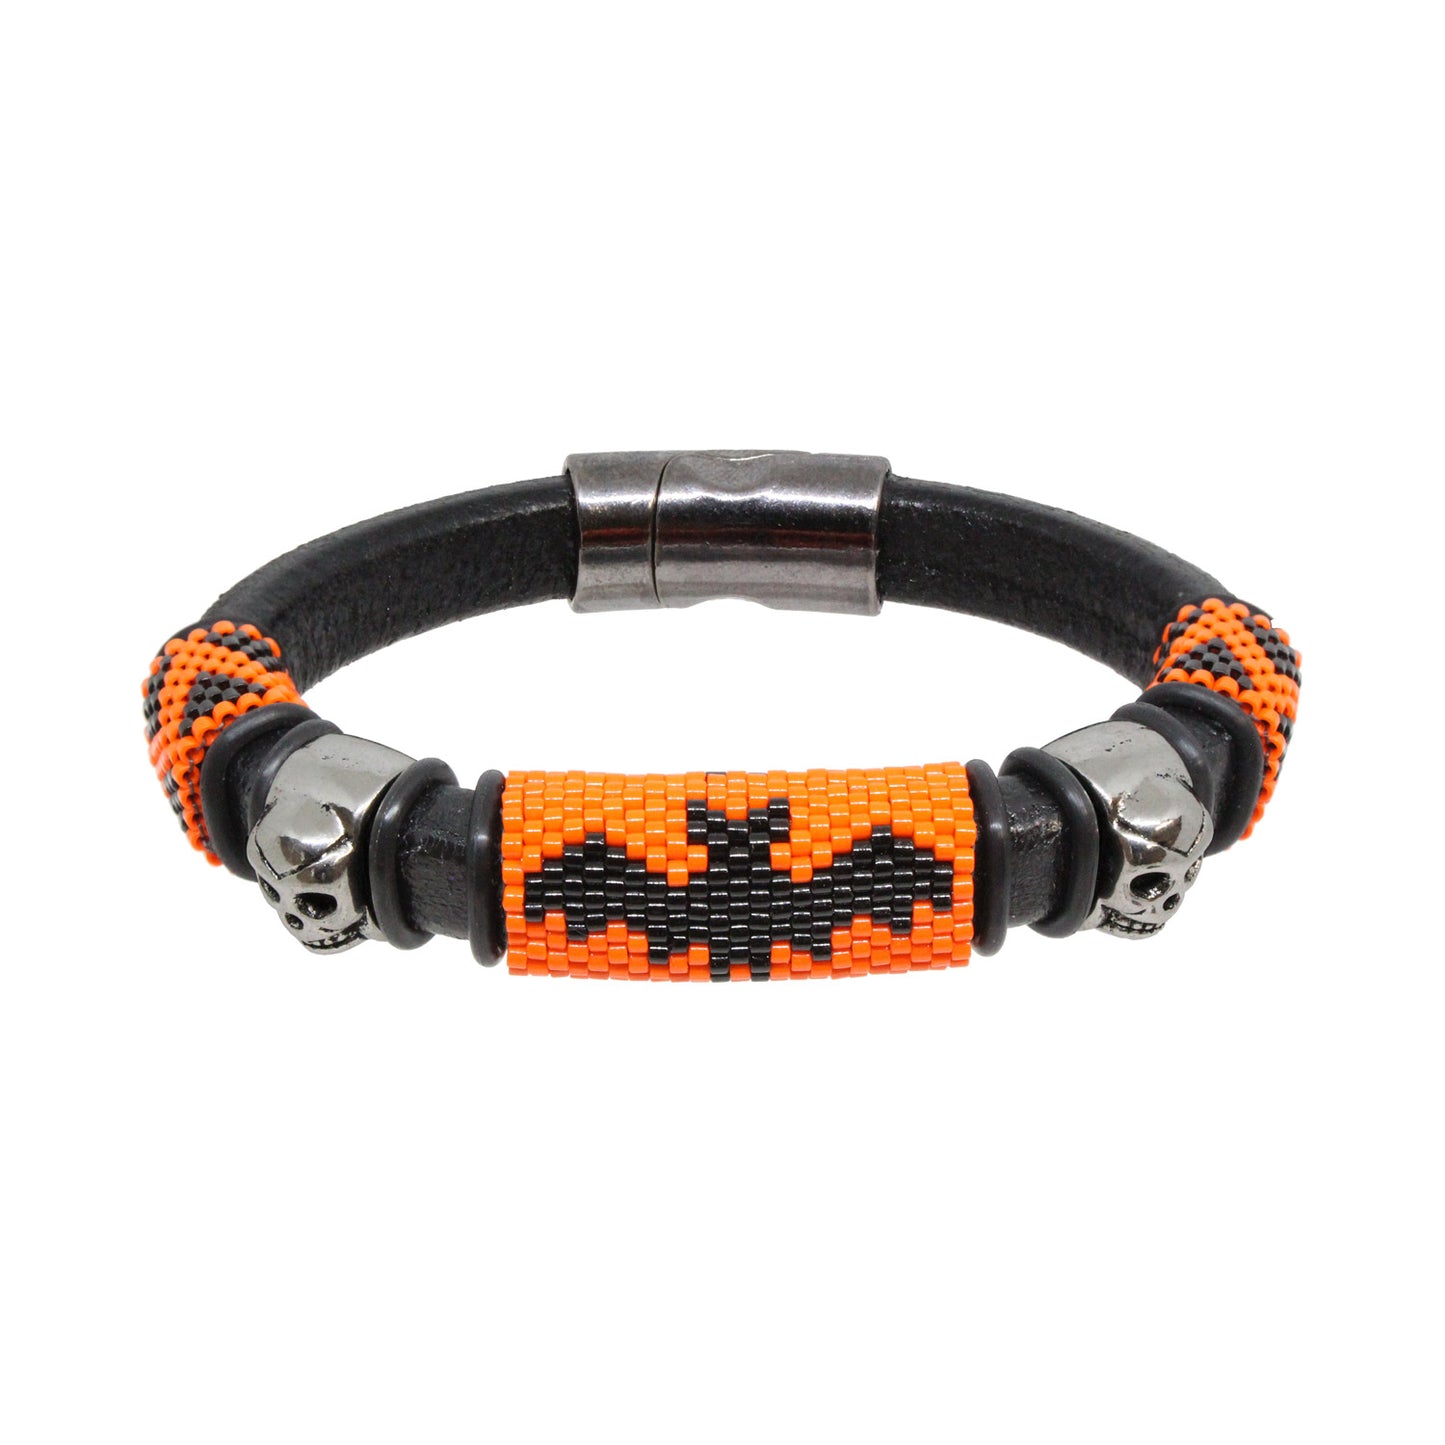 Scary Halloween Bracelet / fits 6.5 to 7 Inch wrist size / large bat with skulls / Euro leather cord / handmade peyote stitch sliders